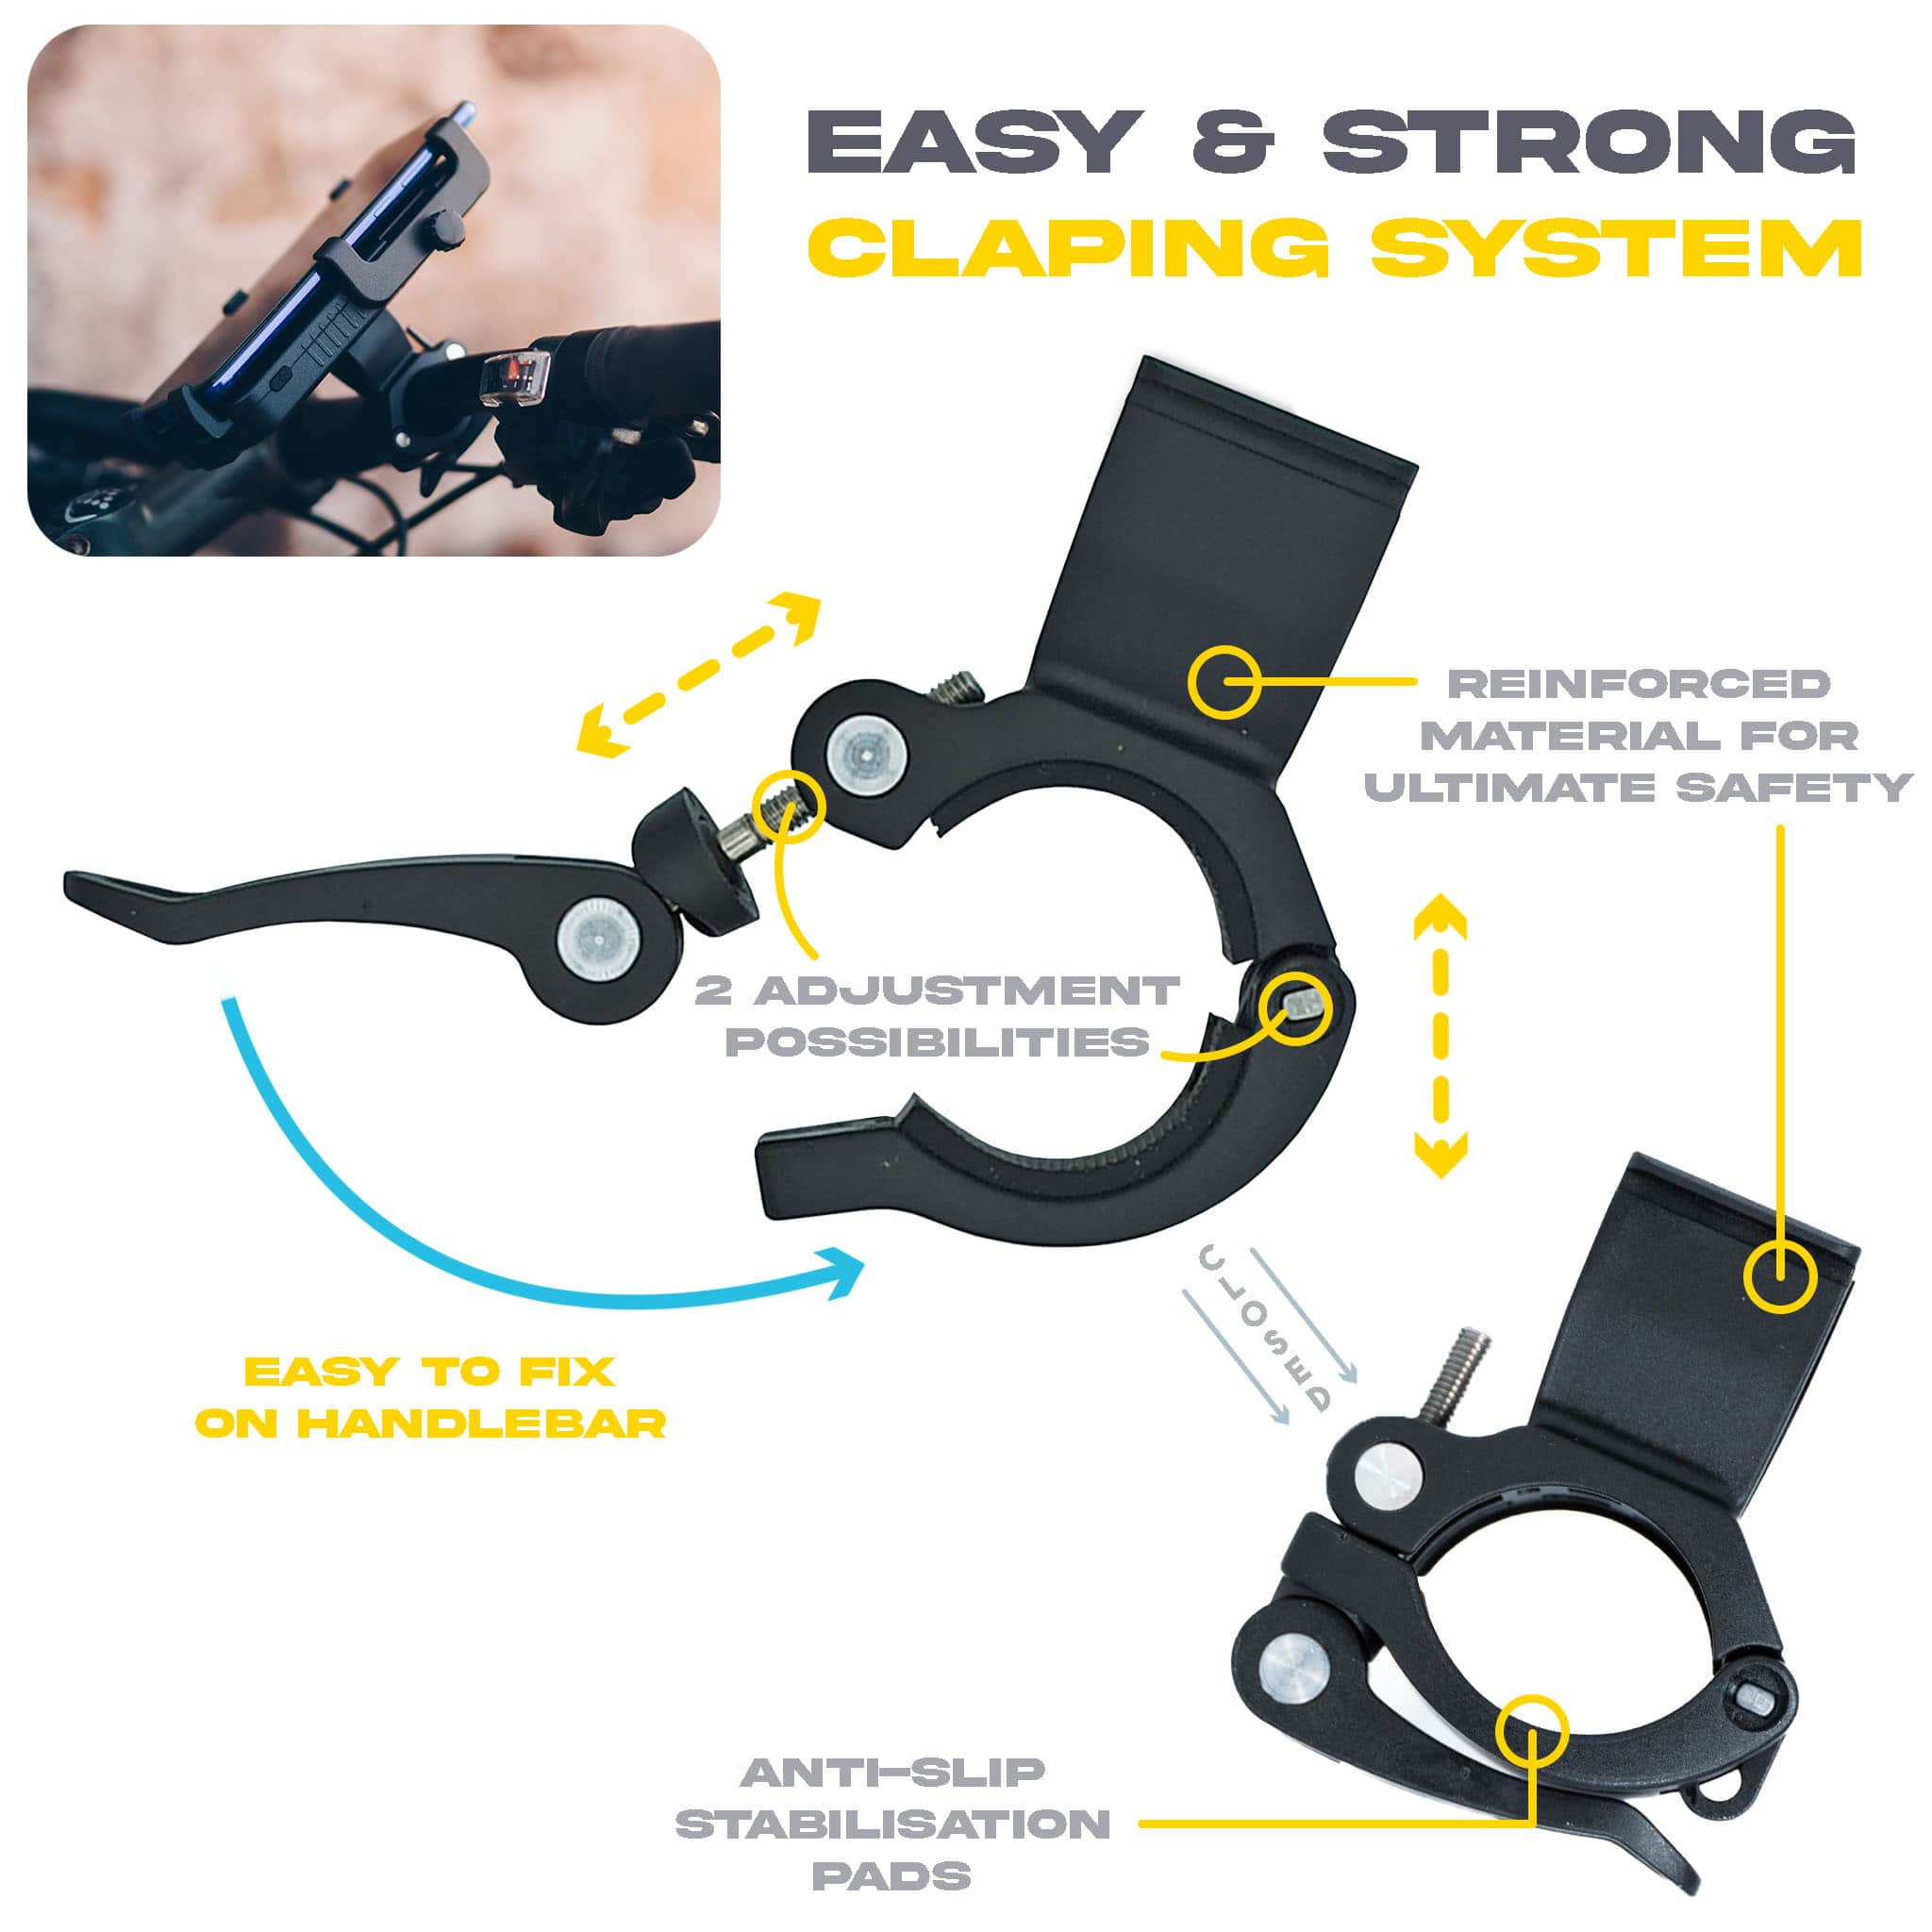 Claping system bicycle phone mount technical specification